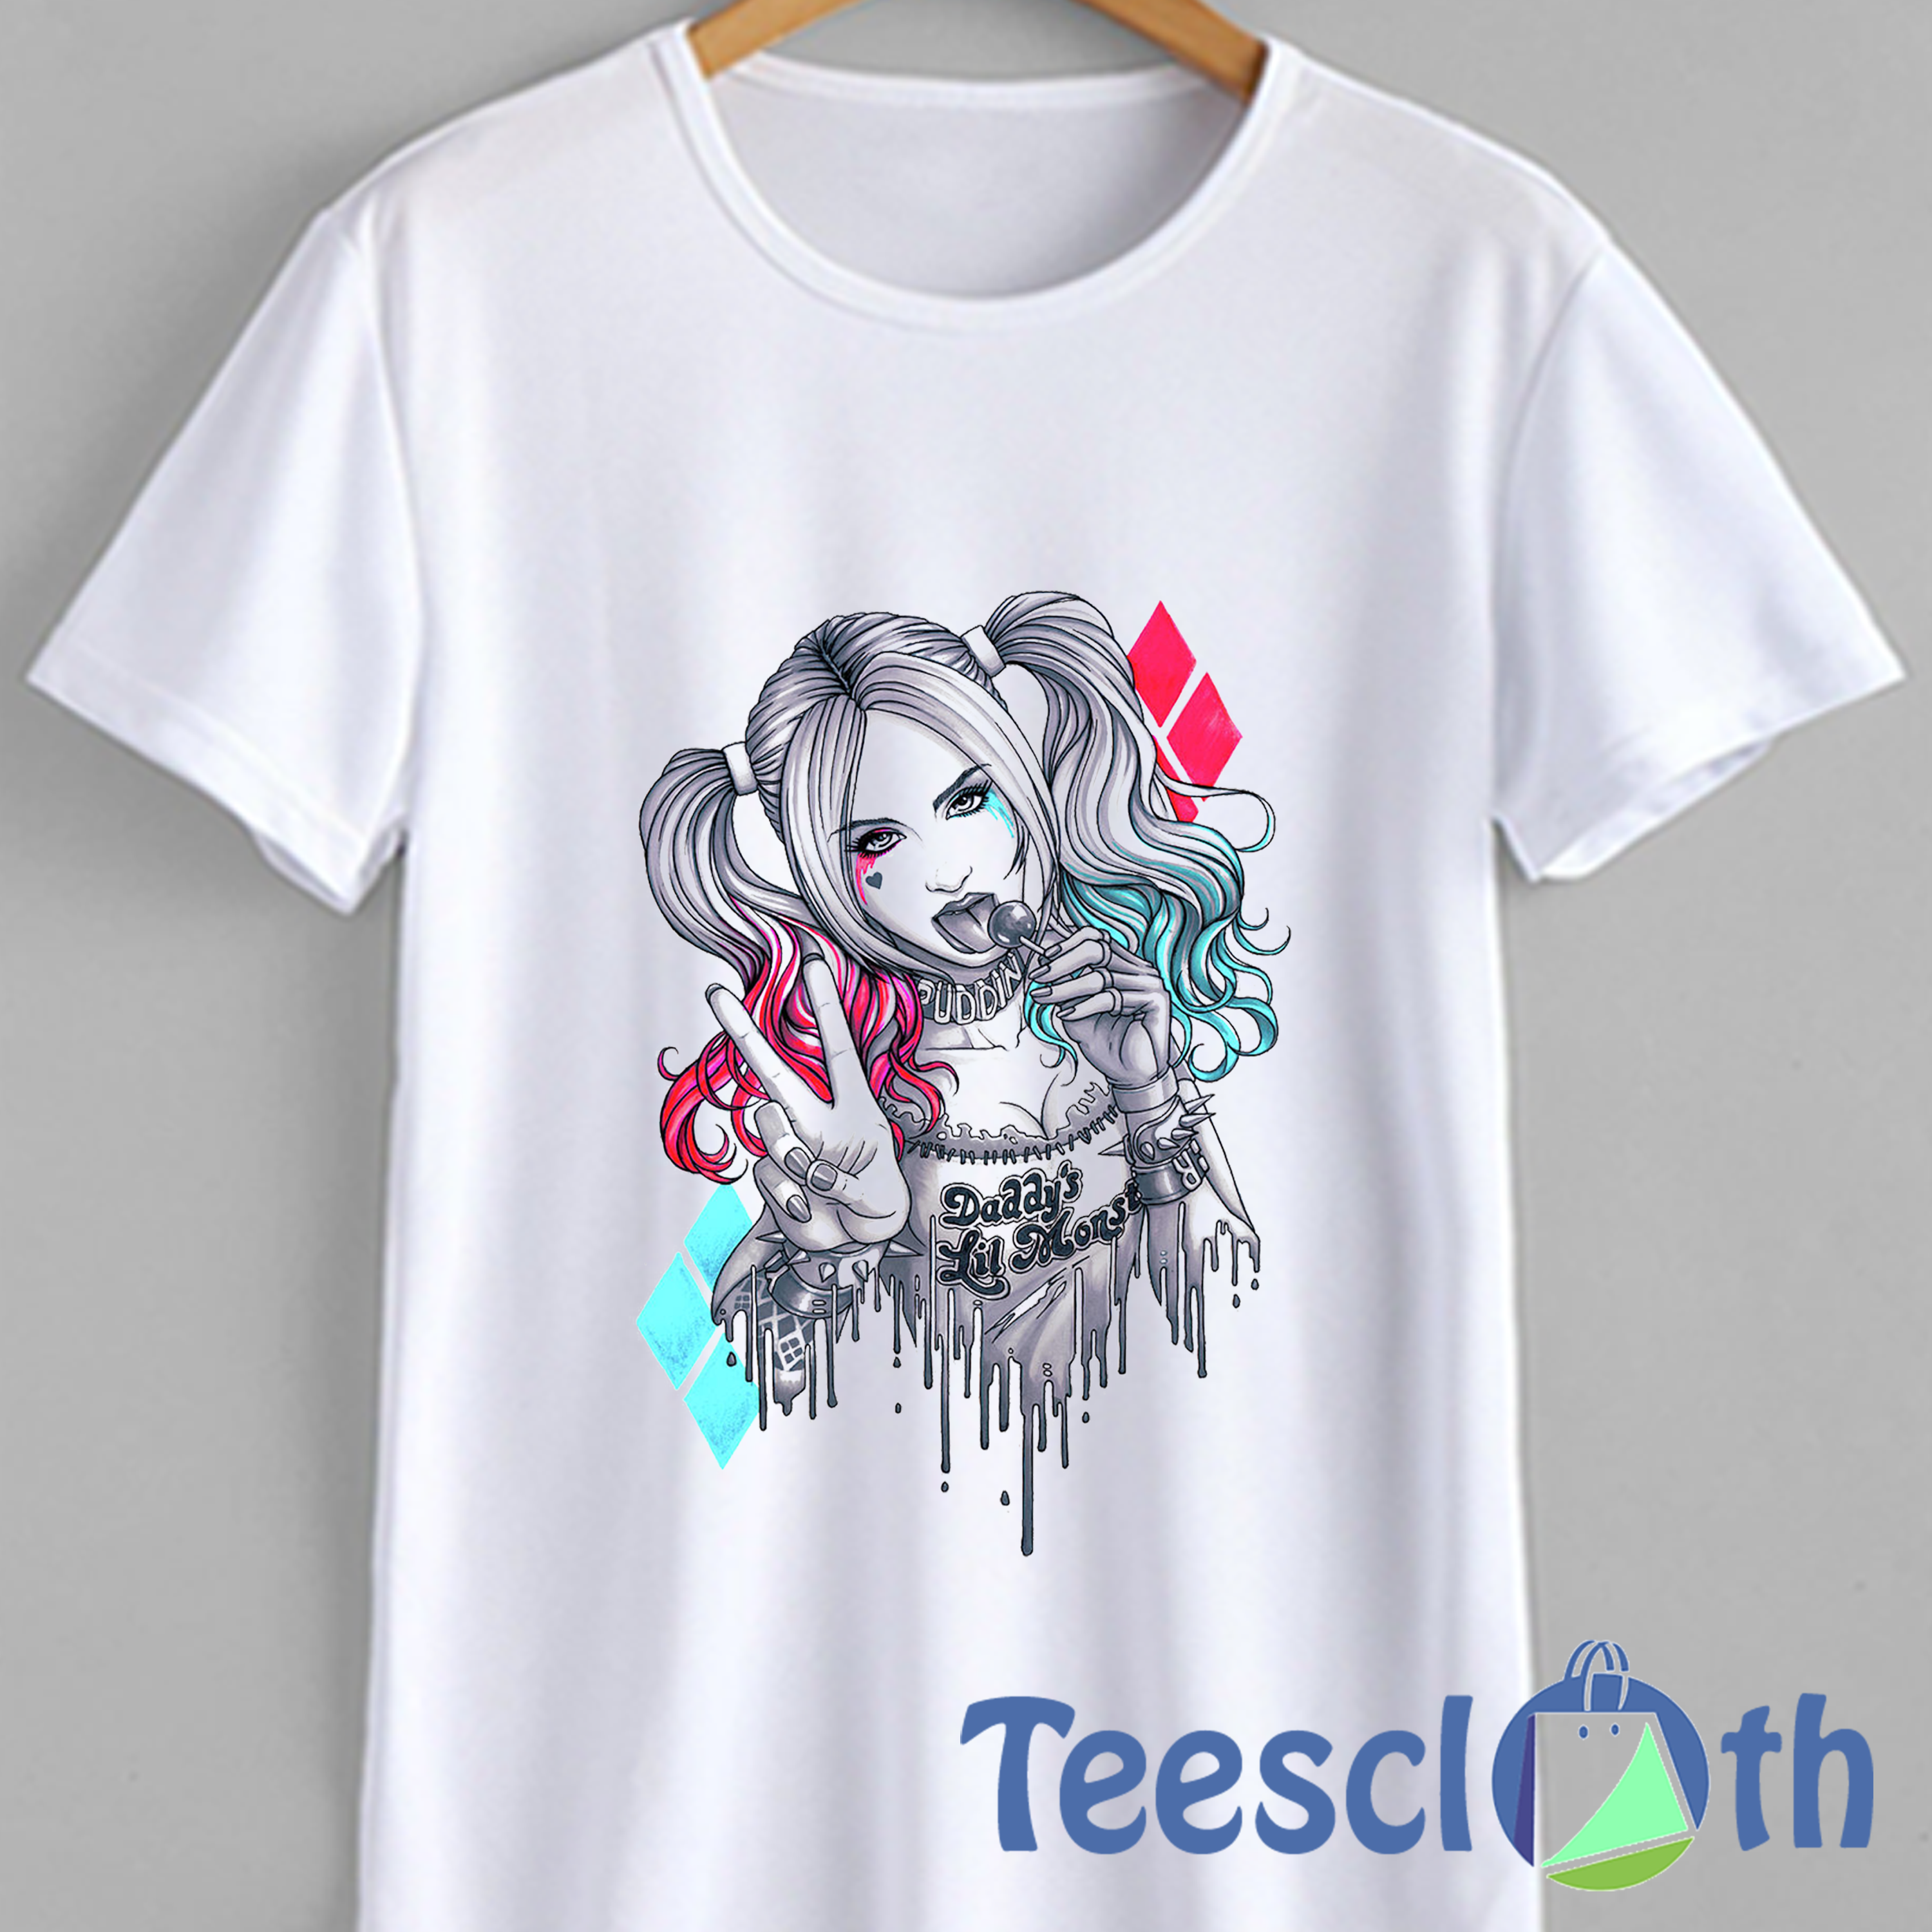 three Dew Humiliate Harley Quinnnn T Shirt For Men Women And Youth